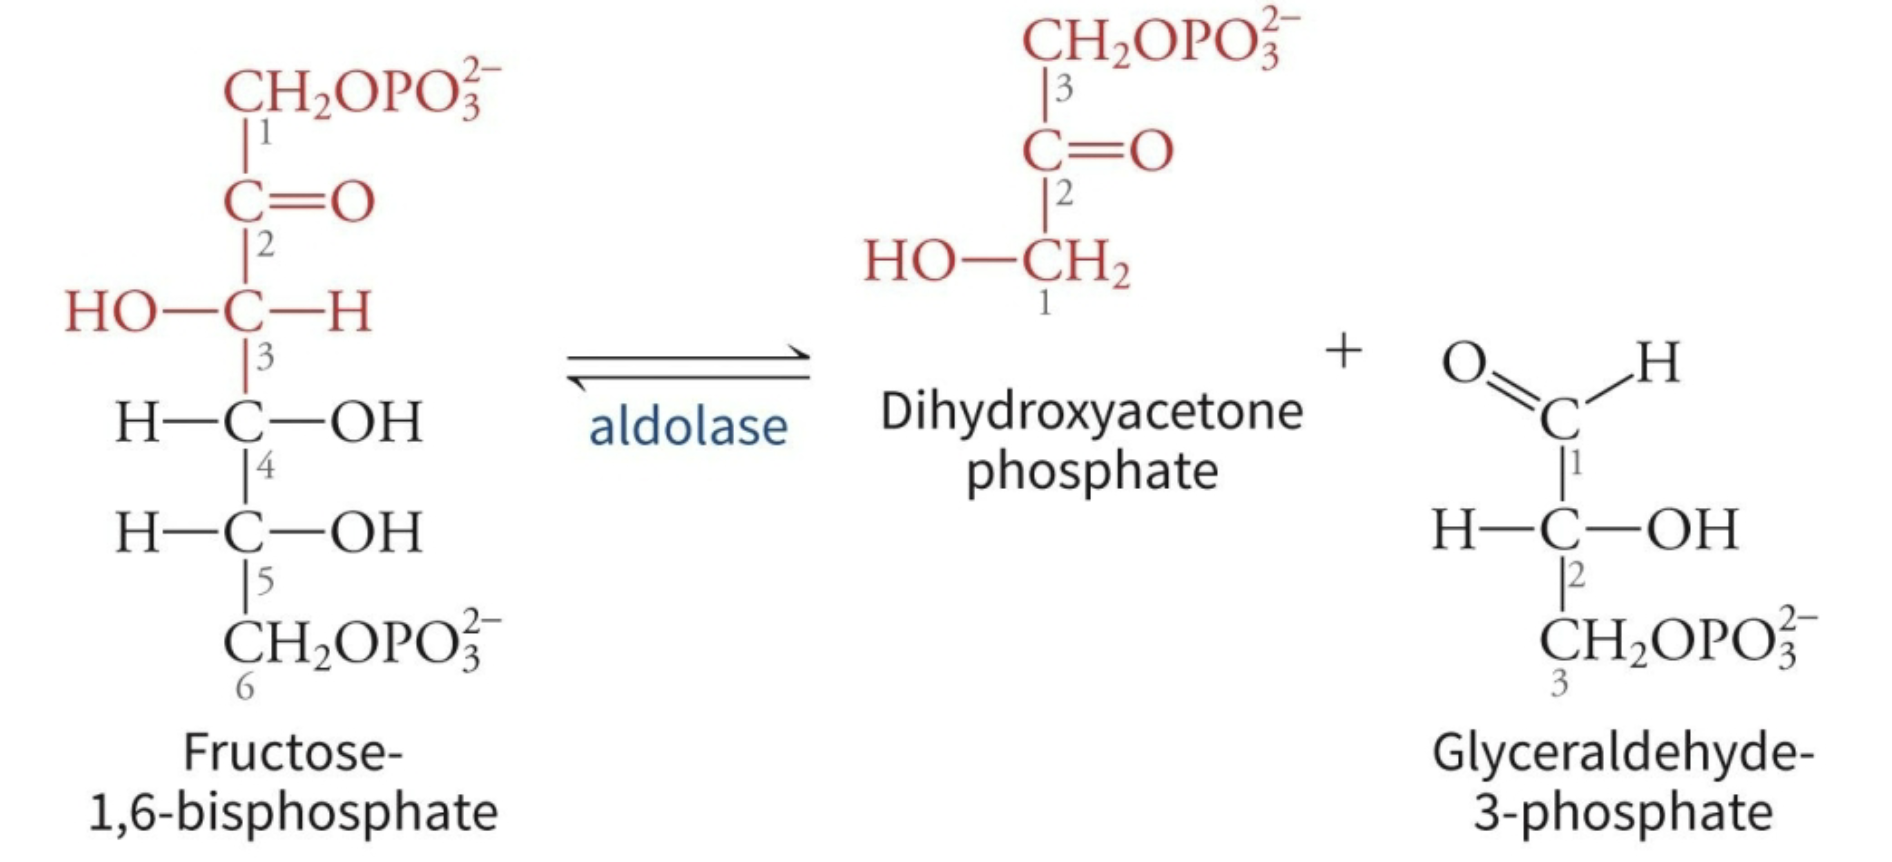 <p>What type of reaction is shown?</p>